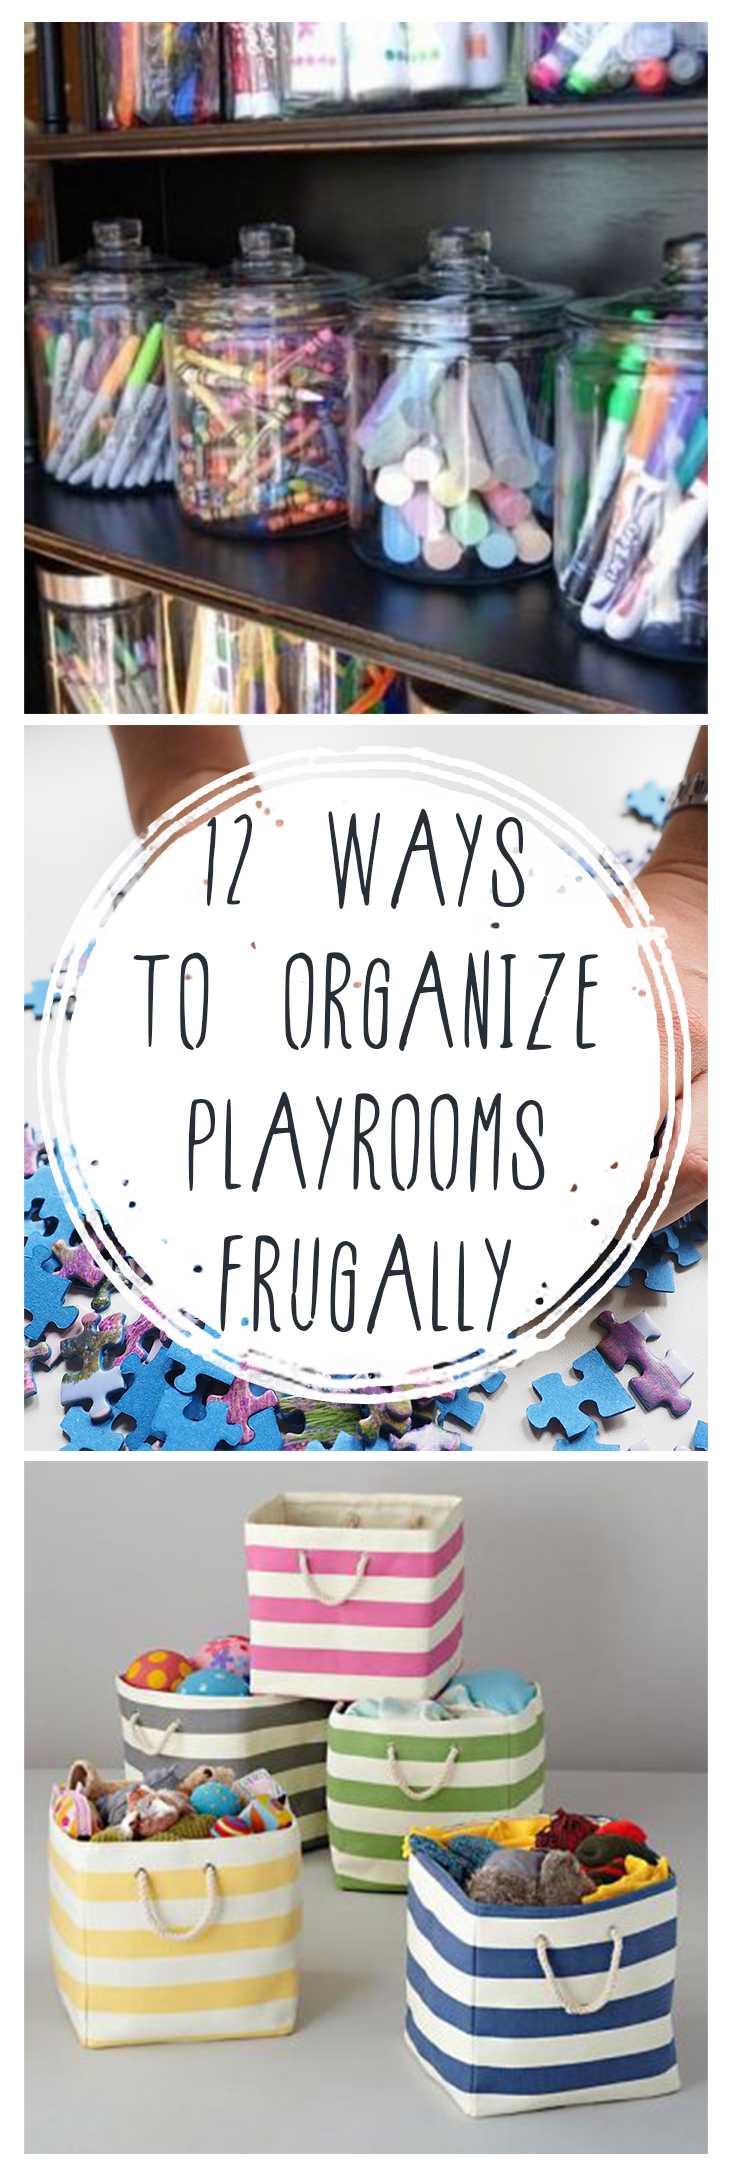 You don't need to spend a fortune on fancy organization boxes and bins to get your playroom organized. Here are 12 ways you can organize your playroom on a budget!